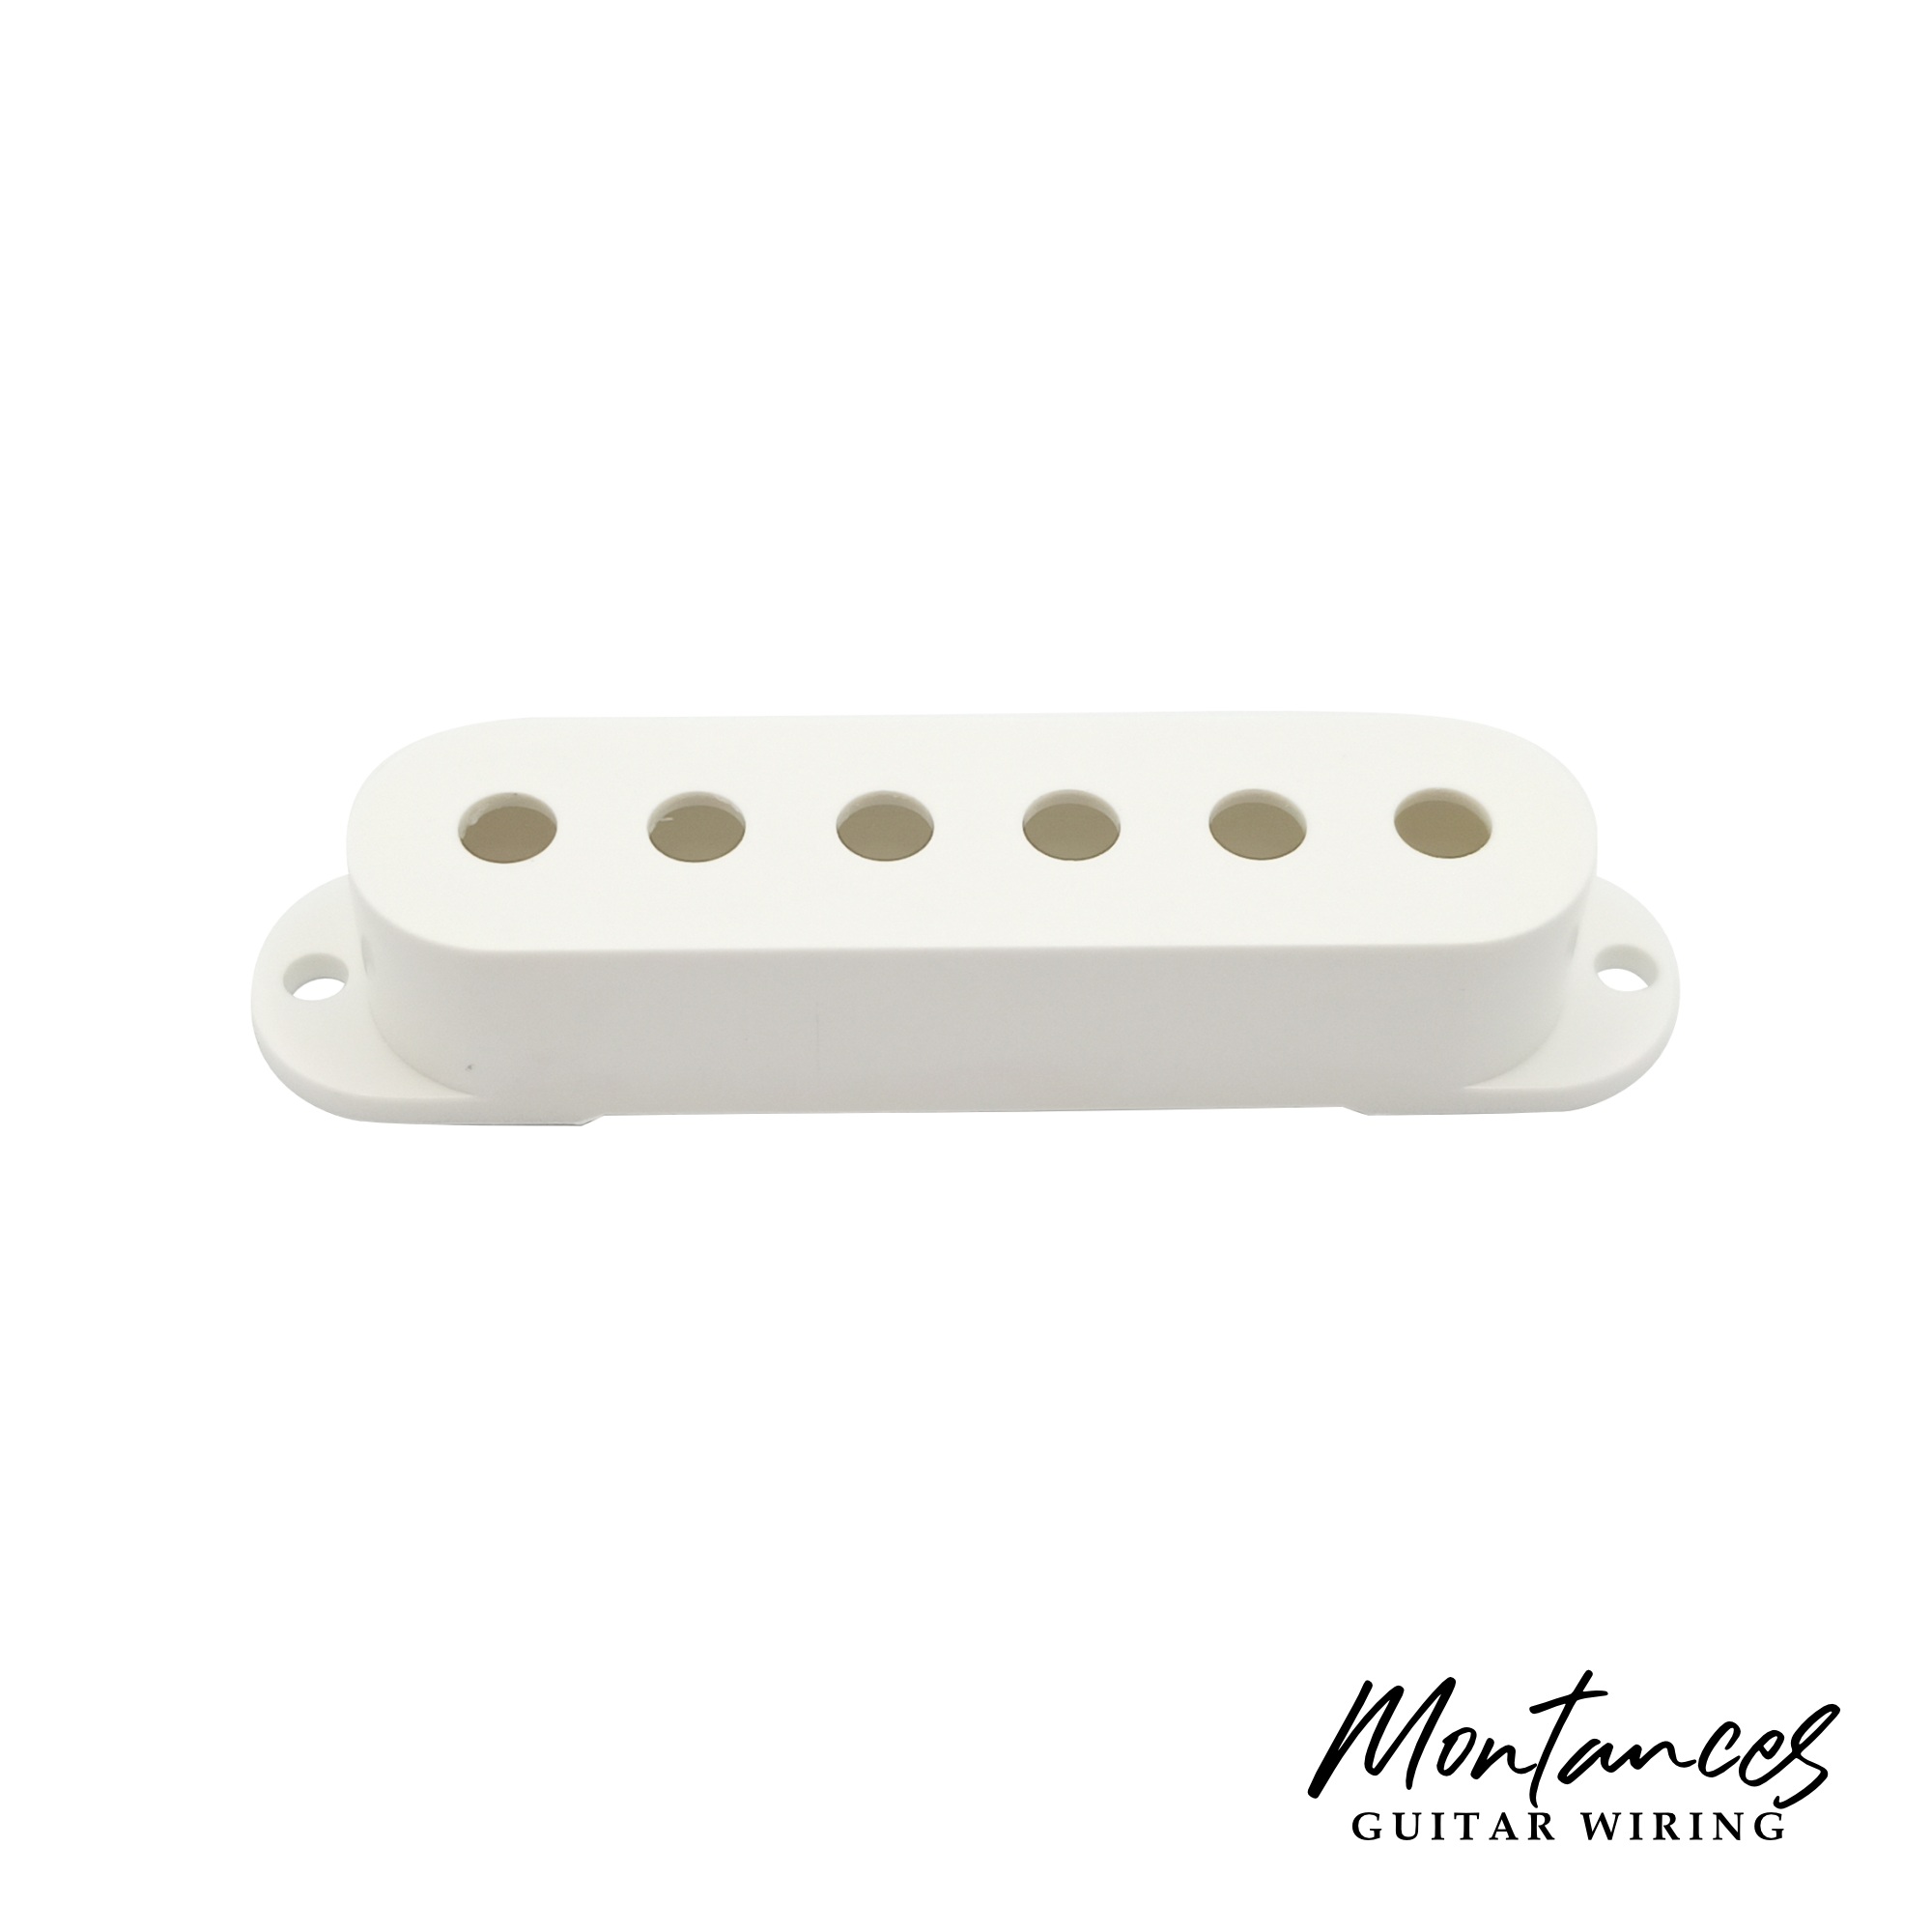 Strat Pickup Cover for Single-Coils 50mm spacing